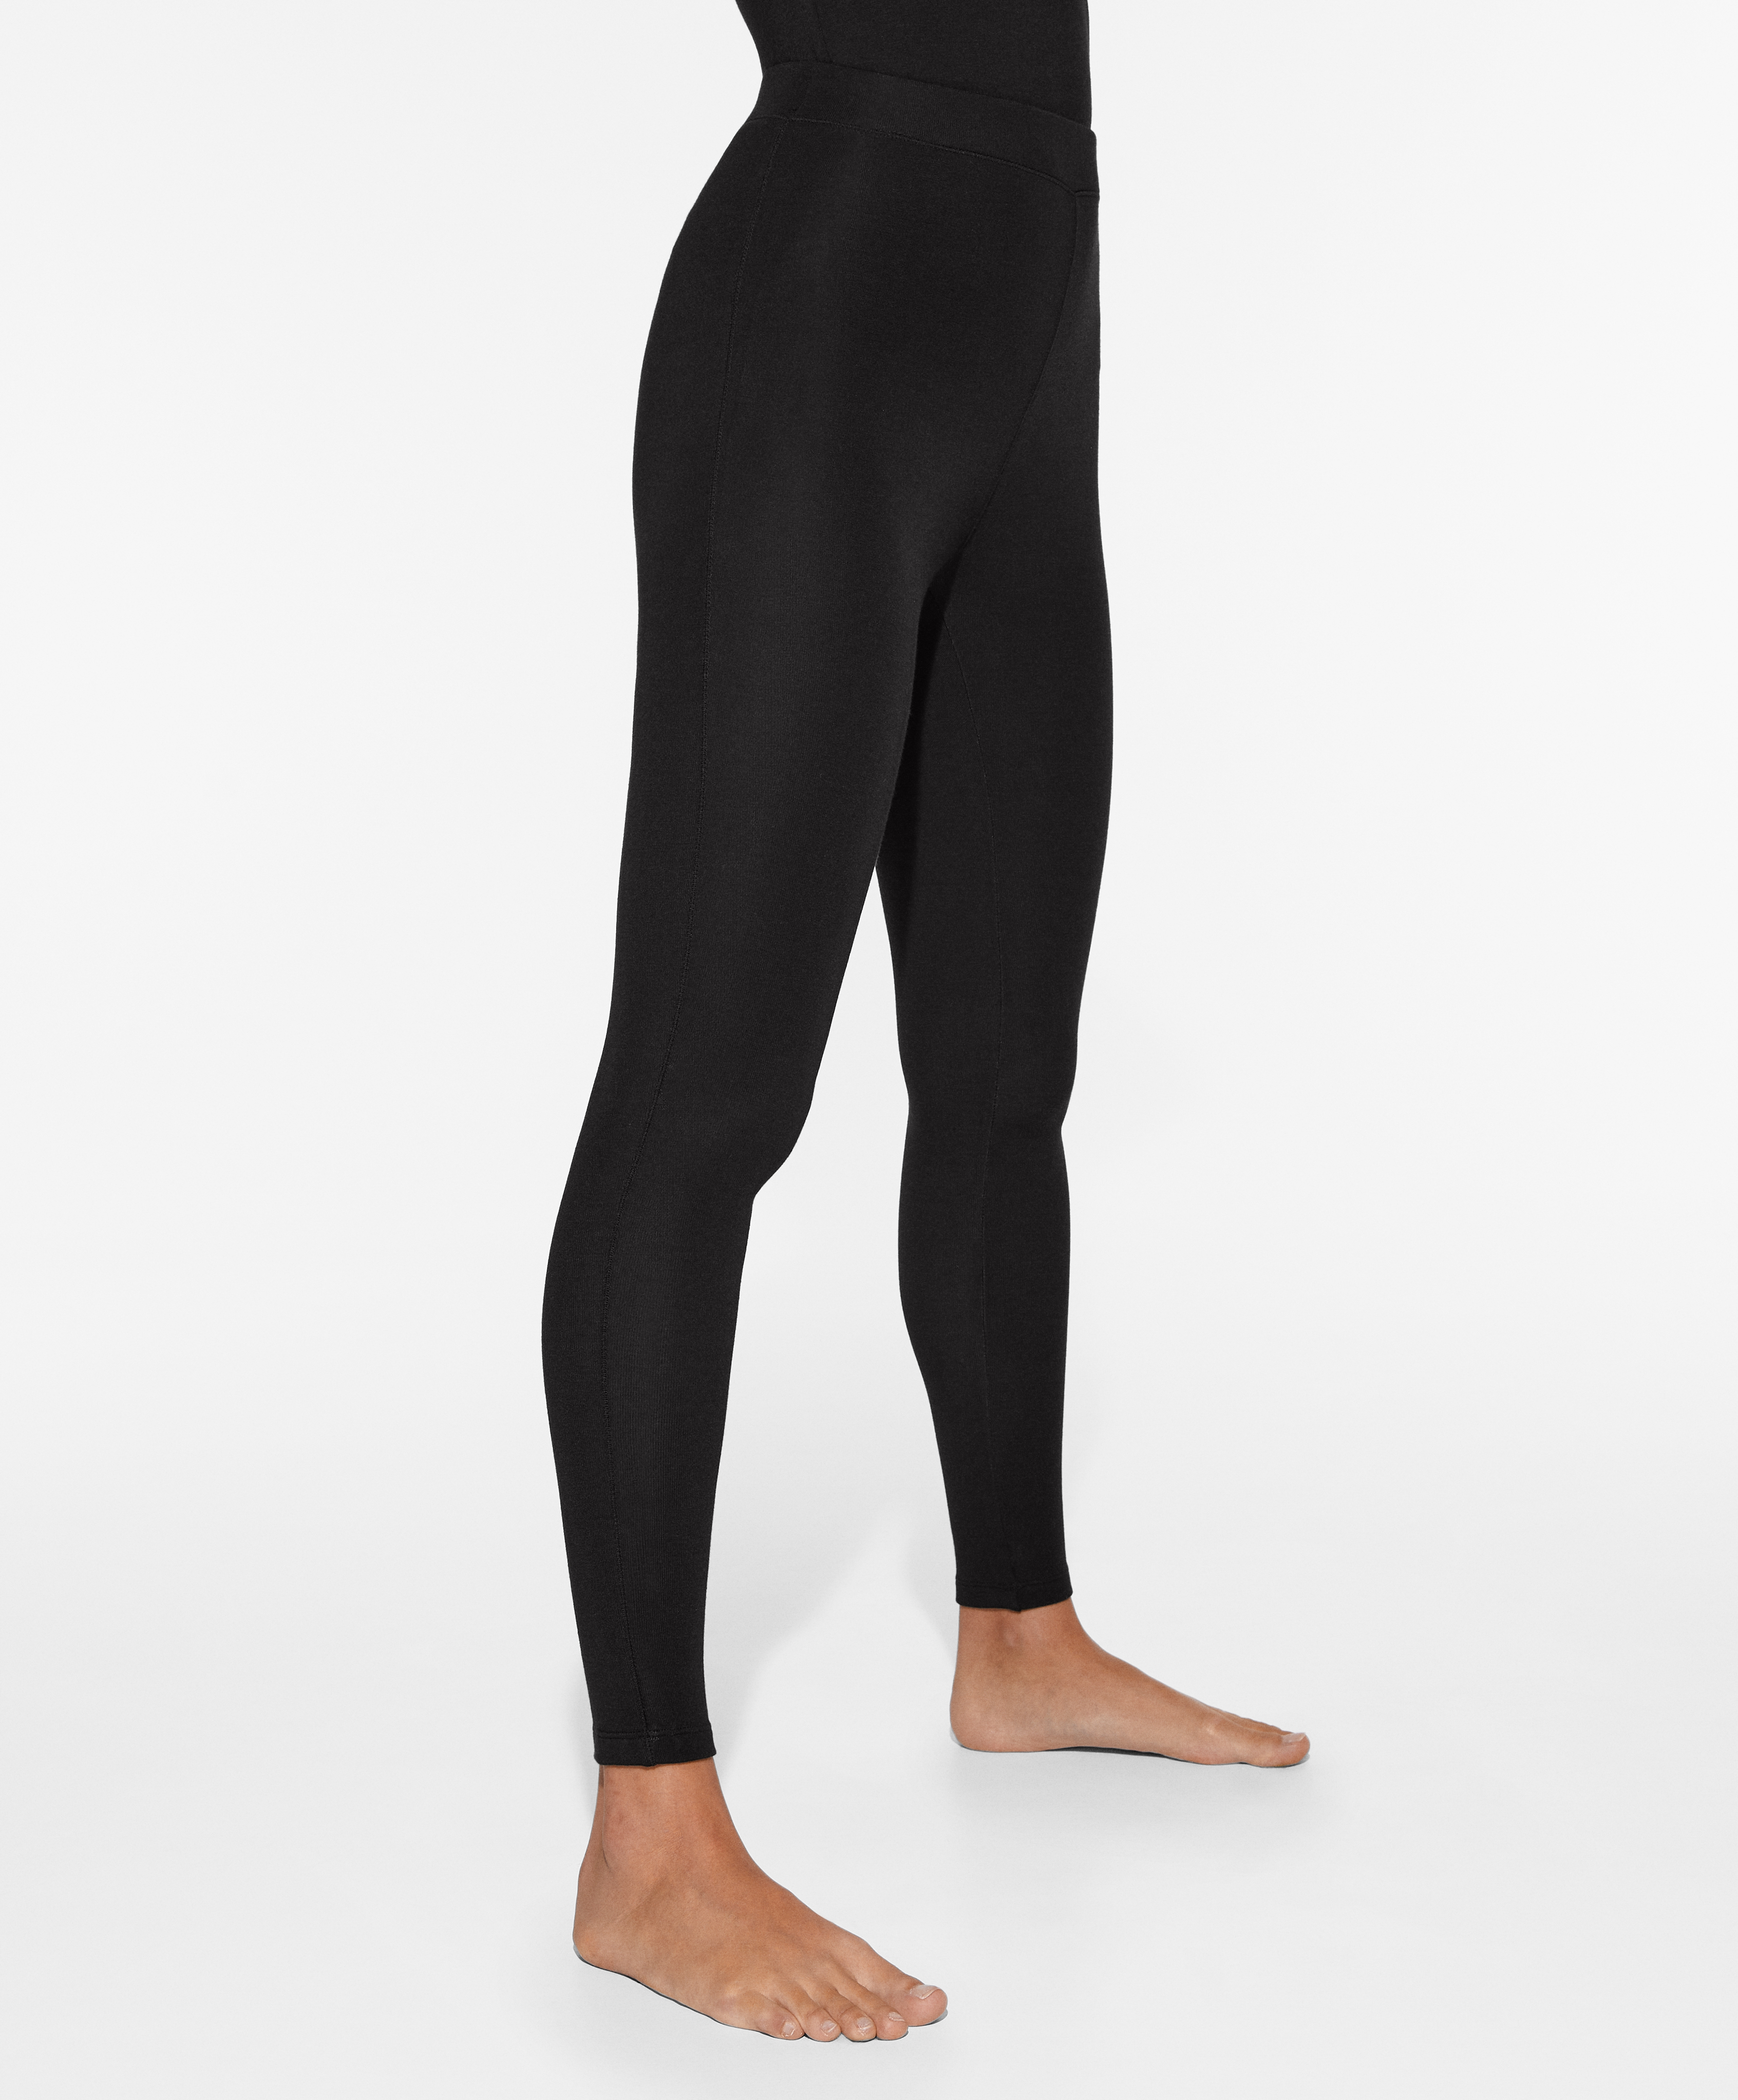 OYSHO - WARM EVIDENCE ⚠️ THE NEW Oysho_Sport LEGGINGS. This winter  essential has been designed to keep you dry and comfortable (*a secret  thing: they have a special warm touch interior). Shop